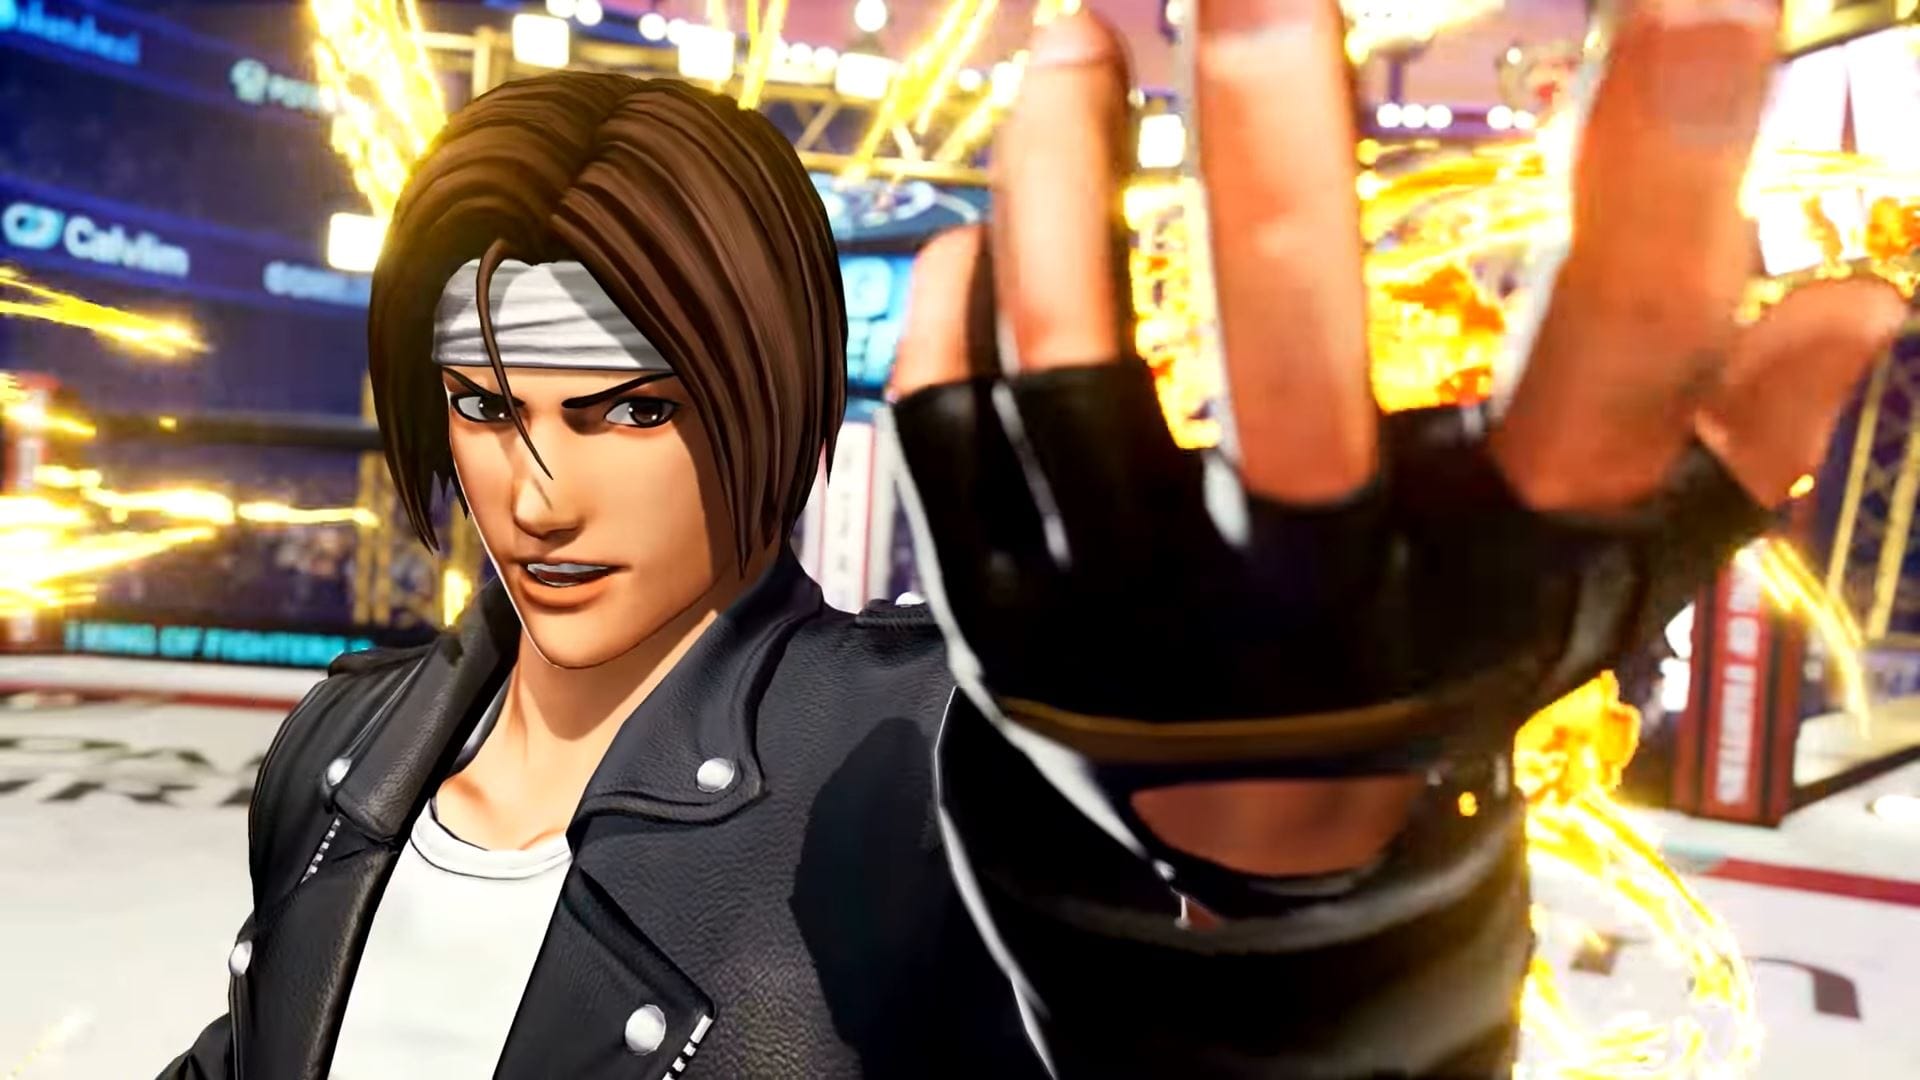 Kyo Kusanagi as he appears in King of Fighters XV